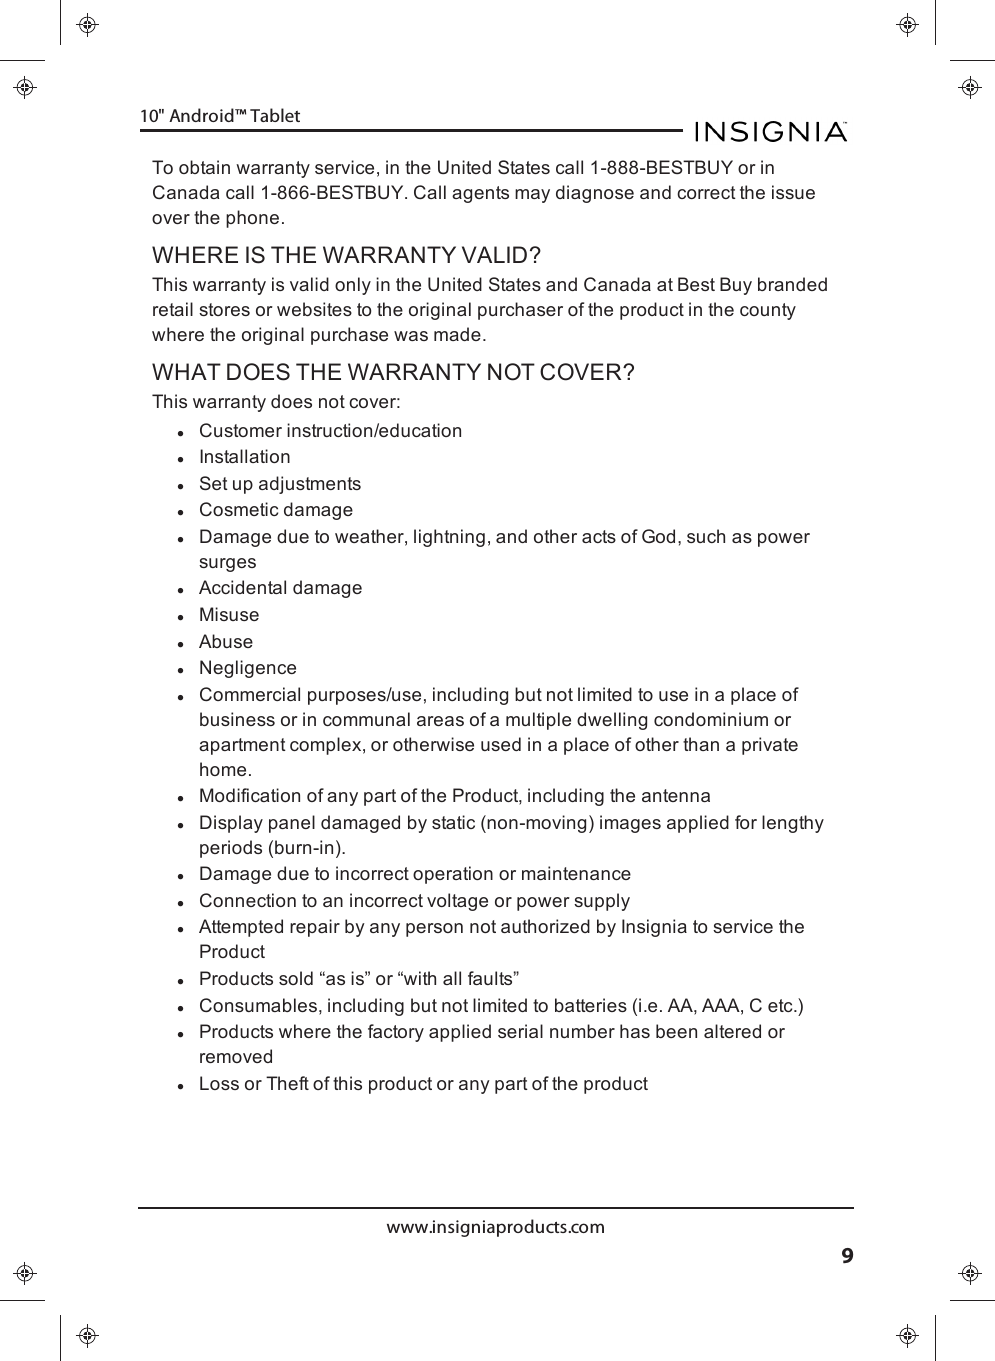 To obtain warranty service, in the United States call 1-888-BESTBUY or inCanada call 1-866-BESTBUY. Call agents may diagnose and correct the issueover the phone.WHERE IS THE WARRANTY VALID?This warranty is valid only in the United States and Canada at Best Buy brandedretail stores or websites to the original purchaser of the product in the countywhere the original purchase was made.WHAT DOES THE WARRANTY NOT COVER?This warranty does not cover:lCustomer instruction/educationlInstallationlSet up adjustmentslCosmetic damagelDamage due to weather, lightning, and other acts of God, such as powersurgeslAccidental damagelMisuselAbuselNegligencelCommercial purposes/use, including but not limited to use in a place ofbusiness or in communal areas of a multiple dwelling condominium orapartment complex, or otherwise used in a place of other than a privatehome.lModification of any part of the Product, including the antennalDisplay panel damaged by static (non-moving) images applied for lengthyperiods (burn-in).lDamage due to incorrect operation or maintenancelConnection to an incorrect voltage or power supplylAttempted repair by any person not authorized by Insignia to service theProductlProducts sold “as is” or “with all faults”lConsumables, including but not limited to batteries (i.e. AA, AAA, C etc.)lProducts where the factory applied serial number has been altered orremovedlLoss or Theft of this product or any part of the productwww.insigniaproducts.com910&quot;Android™ Tablet